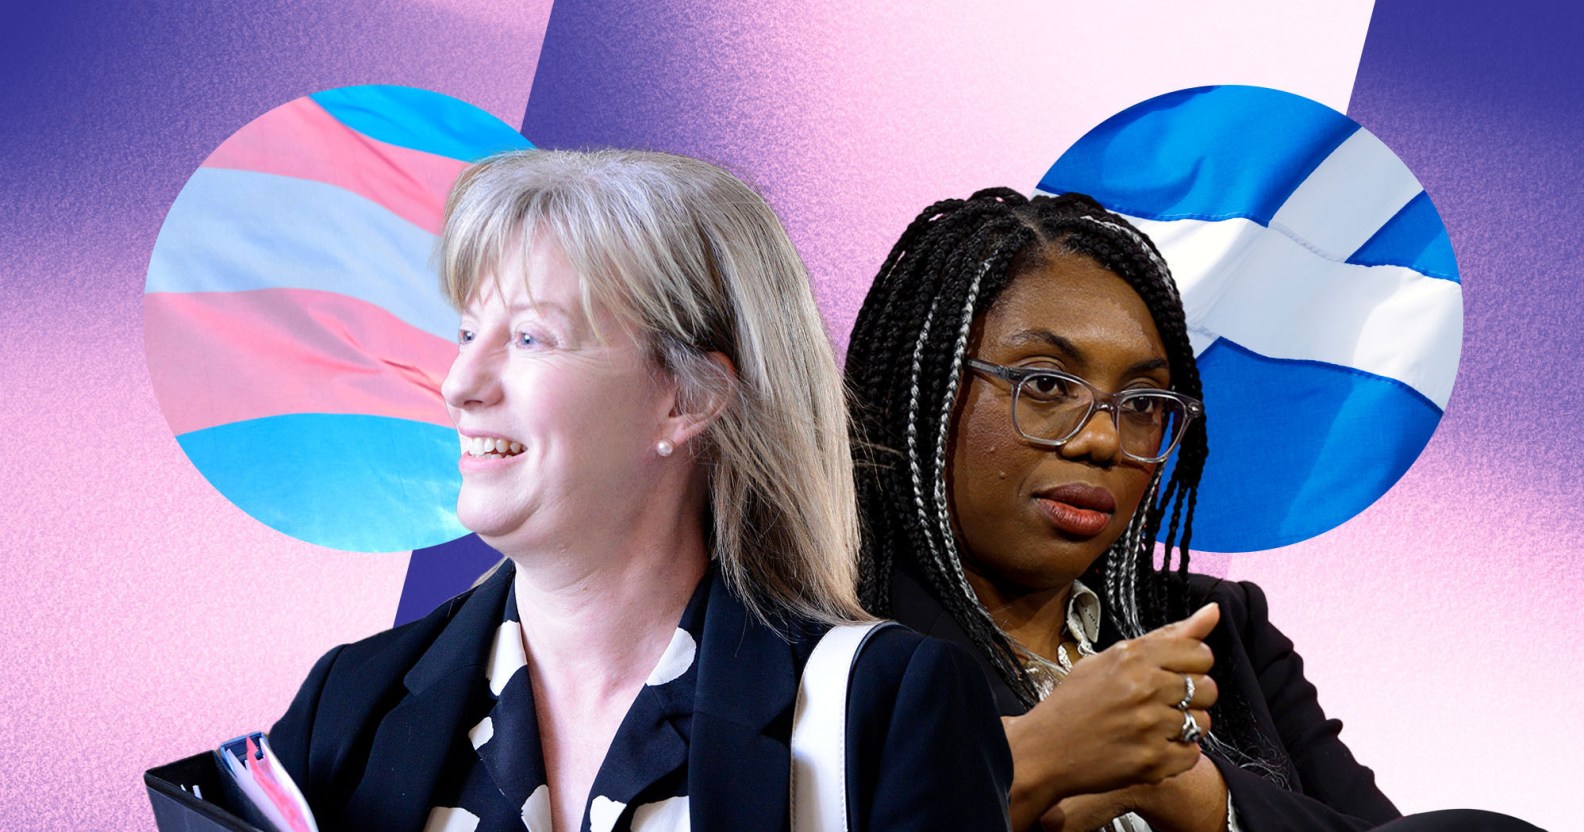 Collage of Shona Robison and Kemi Badenoch, facing away from each other, with the trans rights flag and the Scottish flag behind them